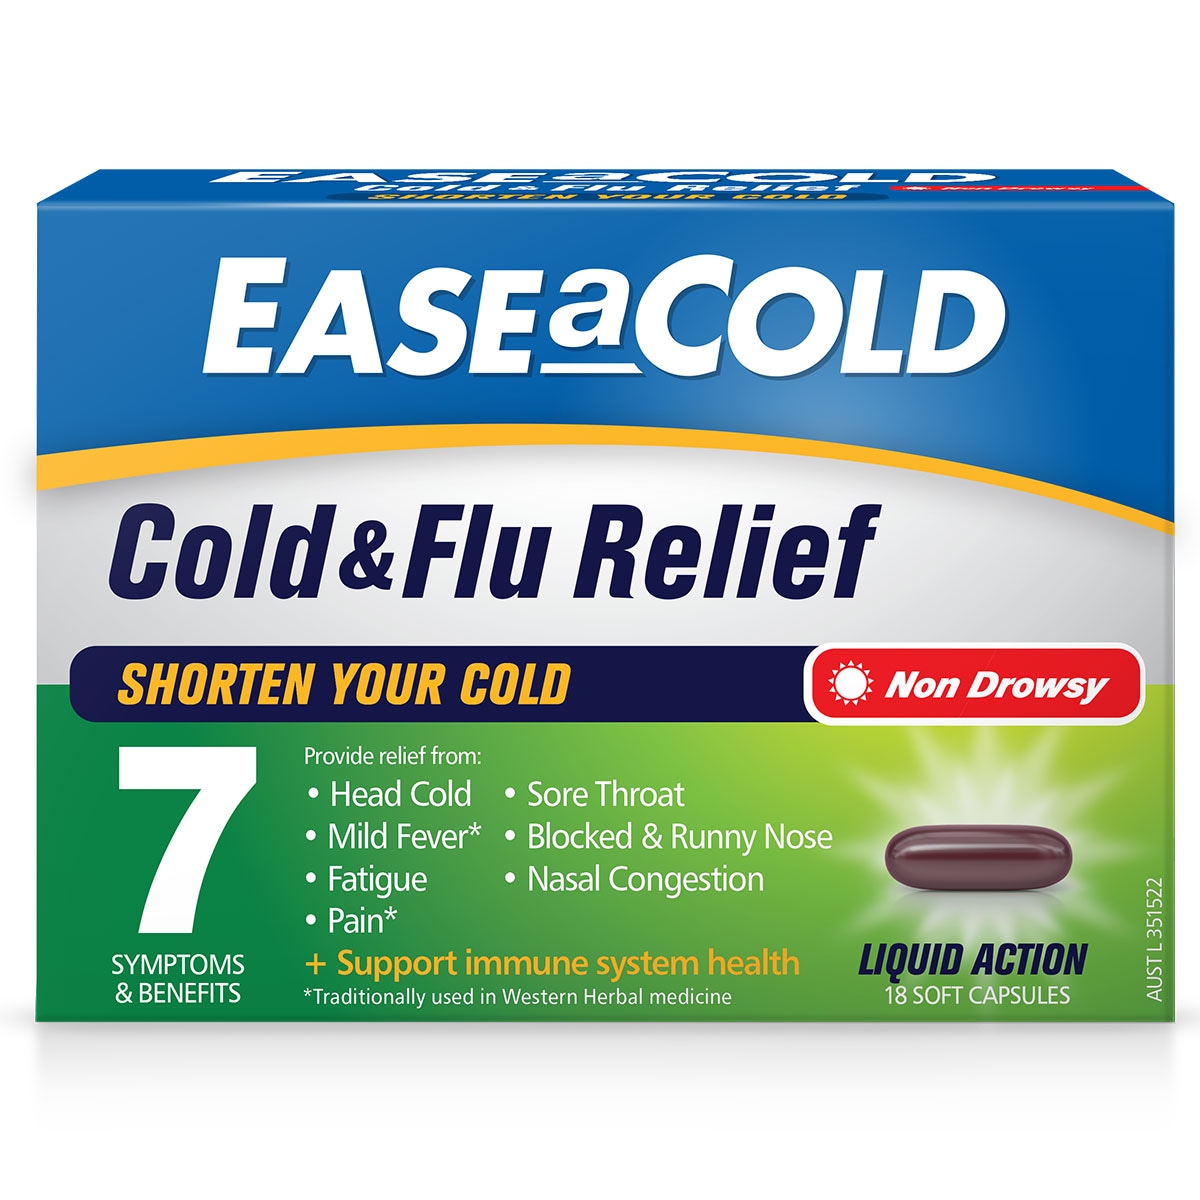 Ease a Cold Cold & Flu Relief Day 18 Capsules